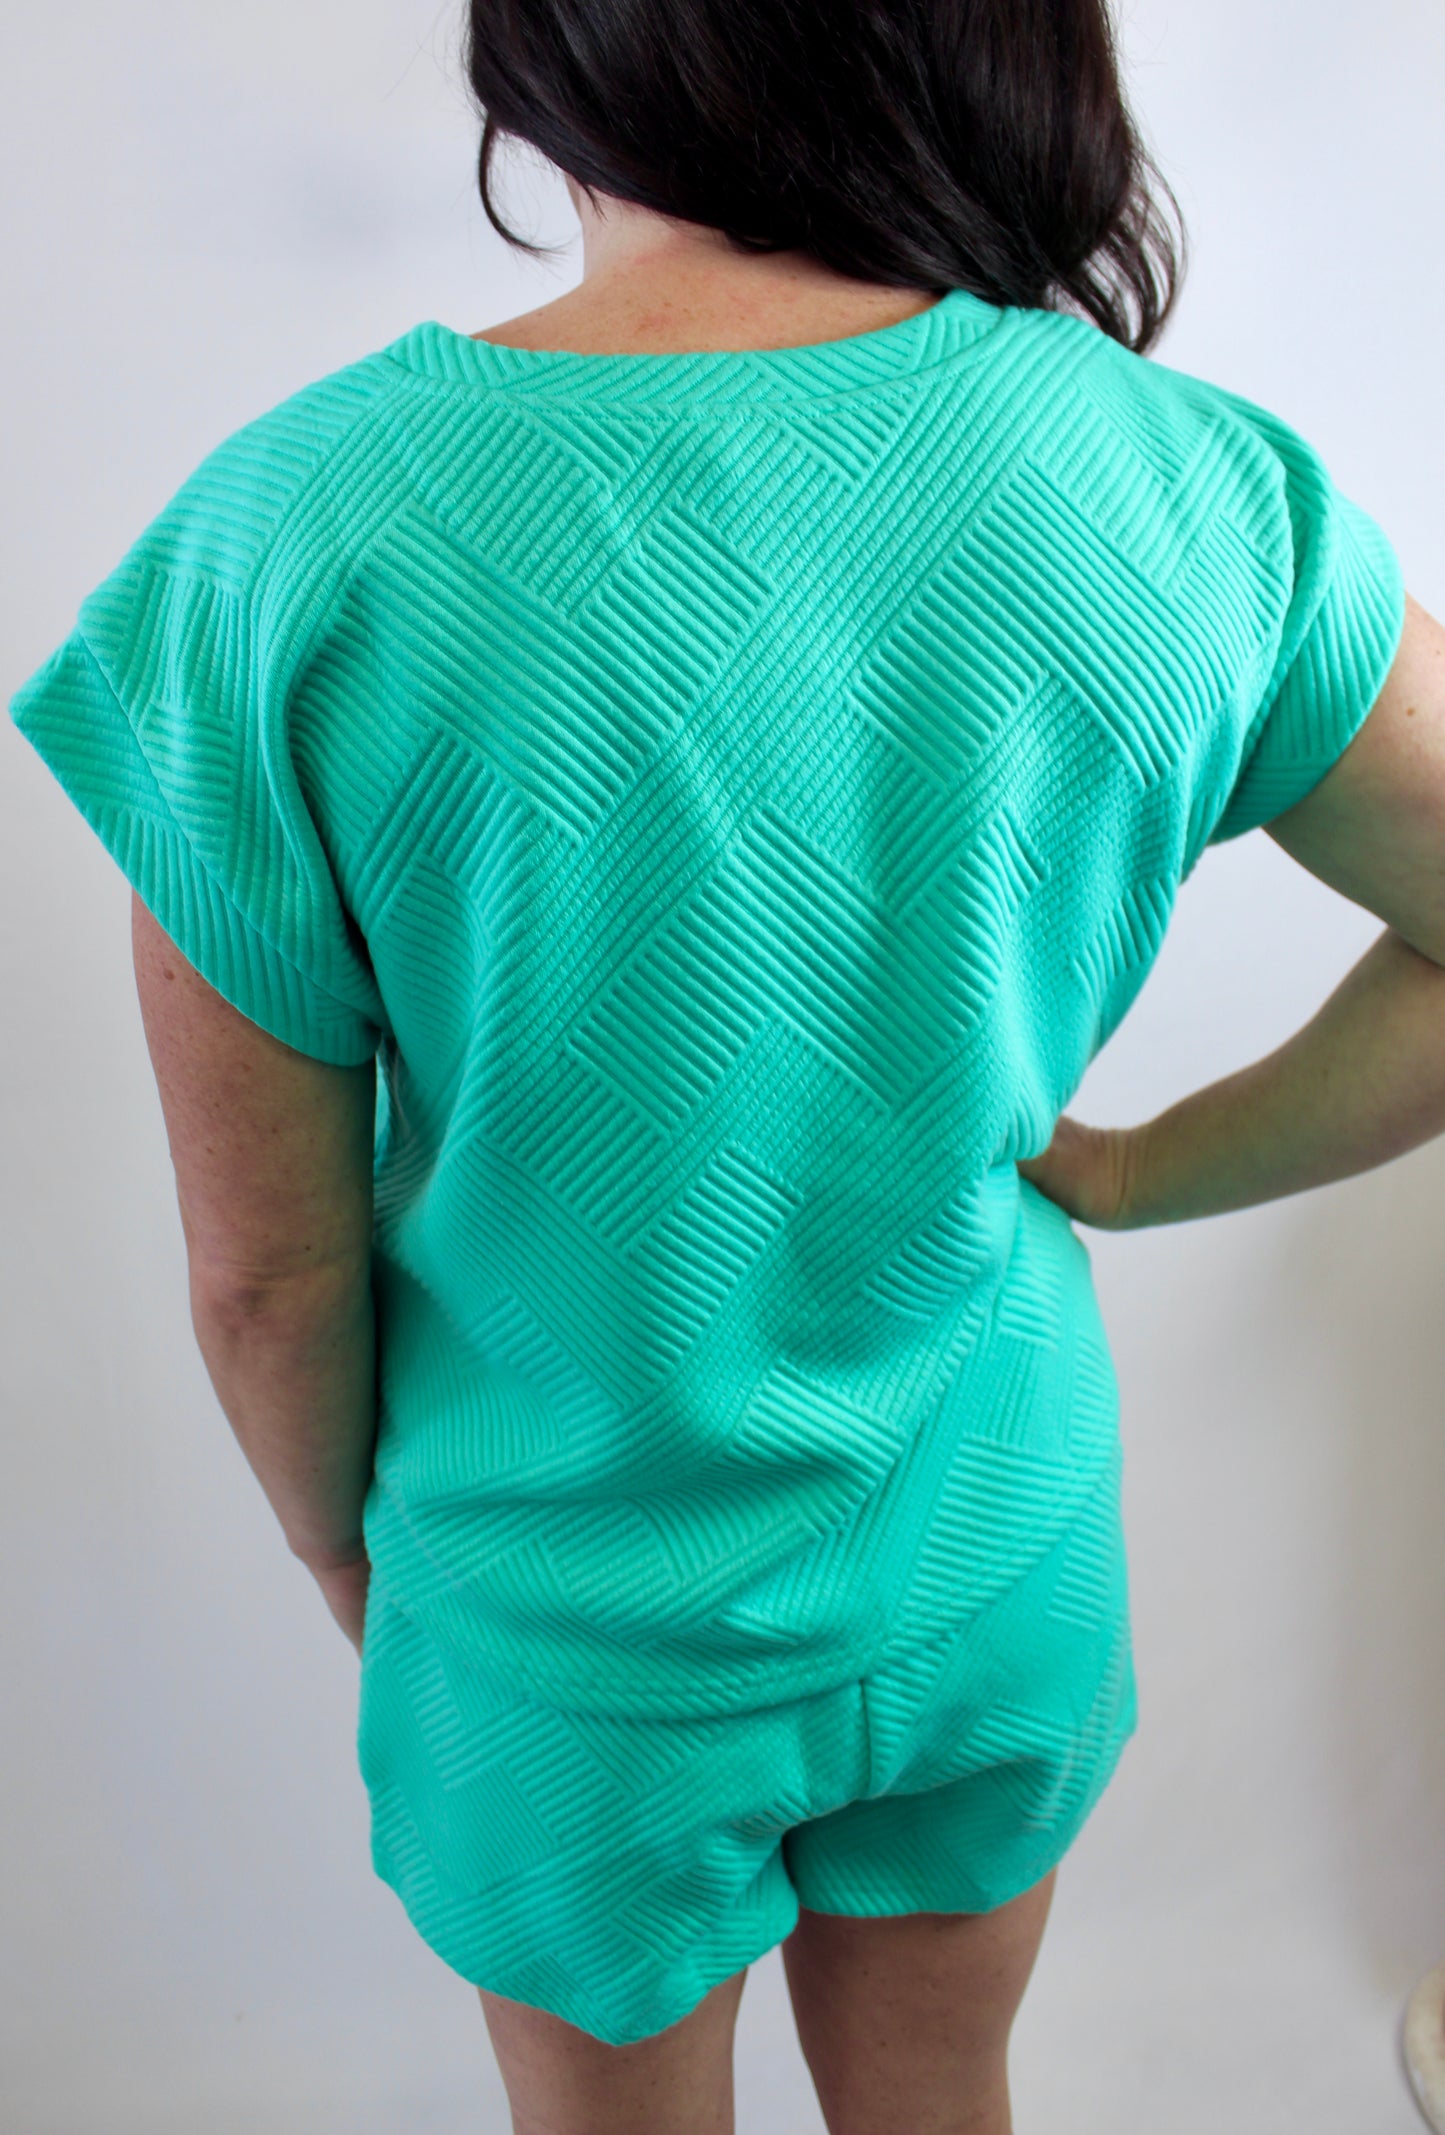 Trail Less Traveled Top In Mint